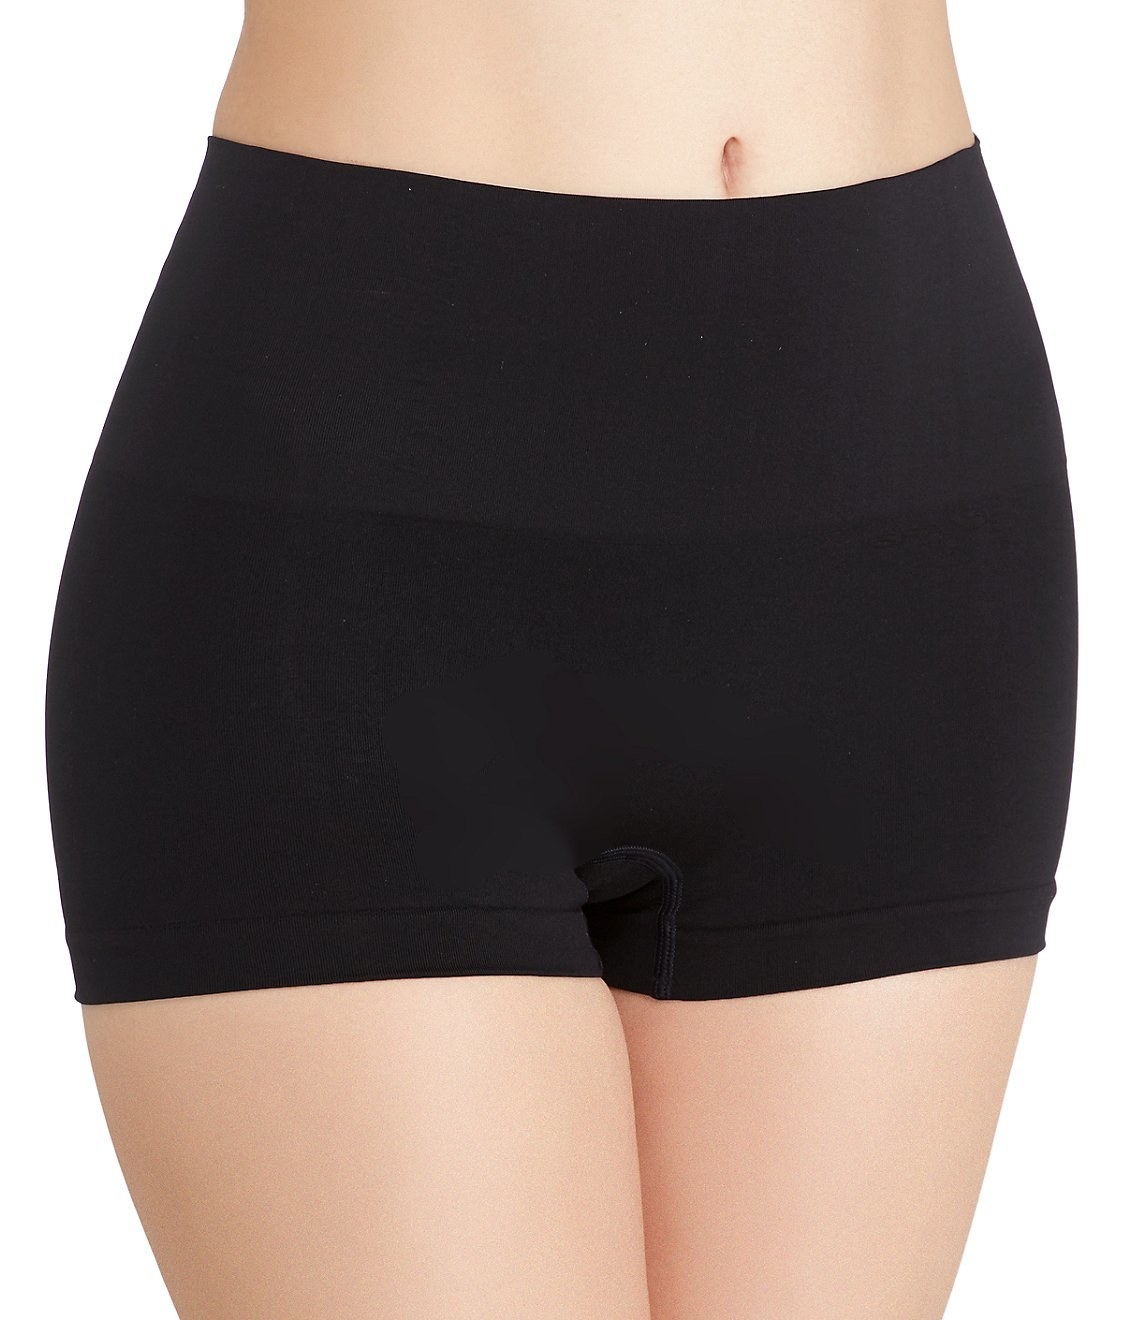 Boyshorts You Need In Your Underwear Drawer